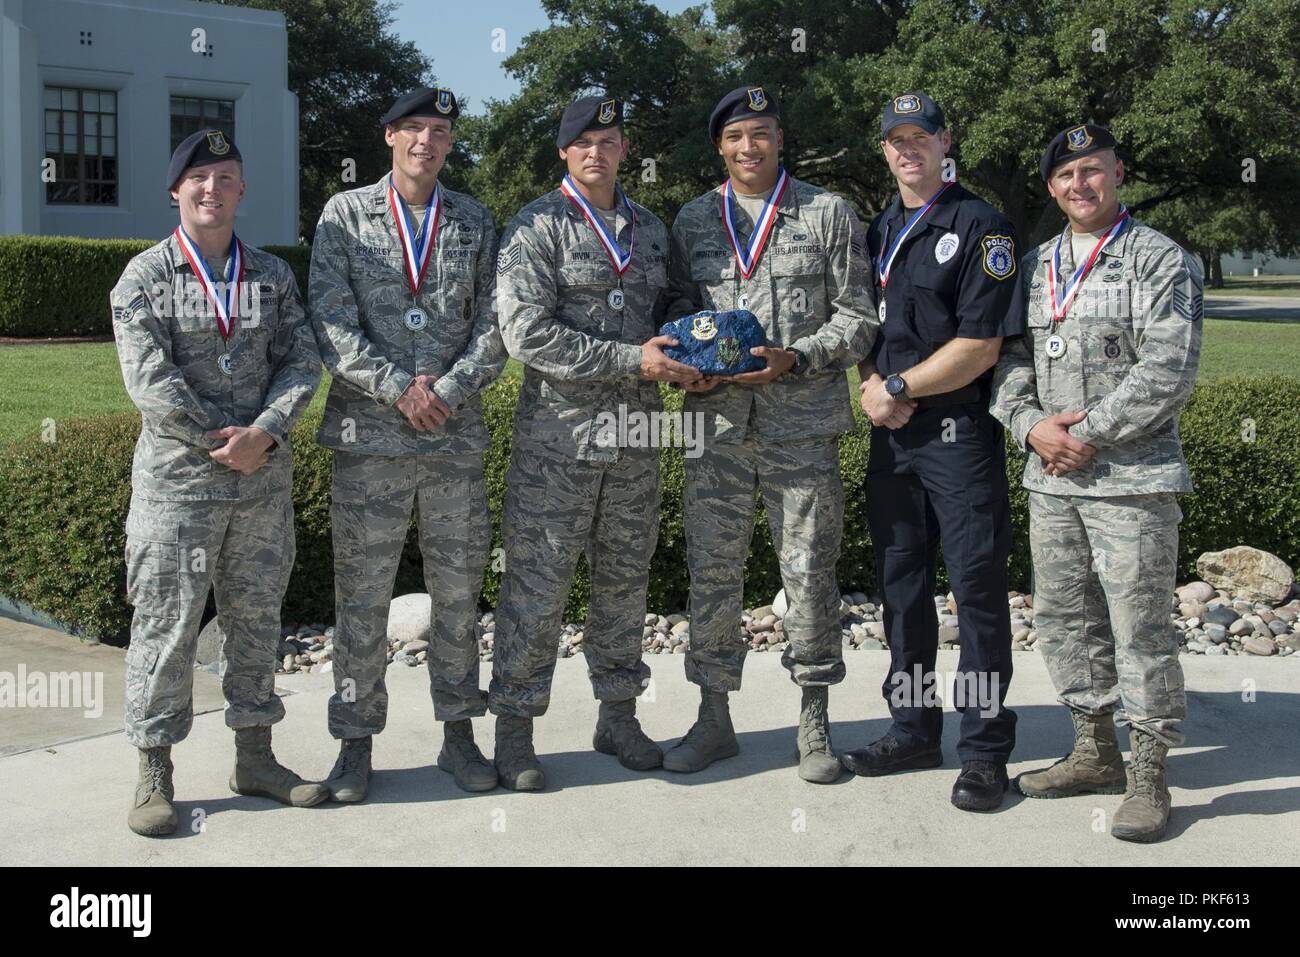 (left to right) Senior Airman William McLaughlin, 502nd Security Forces Squadron, Capt. Nathan Spradley, 902nd SFS, Technical Sgt. Cory Irvin, 37th Training Support Squadron, Senior Airman David Hightower, 56th SFS, Officer Jonathan Vance and Master Sgt. James Murray of the 802nd SFS, pose for a photo after being chosen as the representatives of Air Education and Training Command’s Defender Challenge team July 27, 2018, at Joint Base San Antonio-Randolph, Texas. Defender Challenge is a Security Forces competition that pits teams against each other in realistic weapons, dismounted operations an Stock Photo